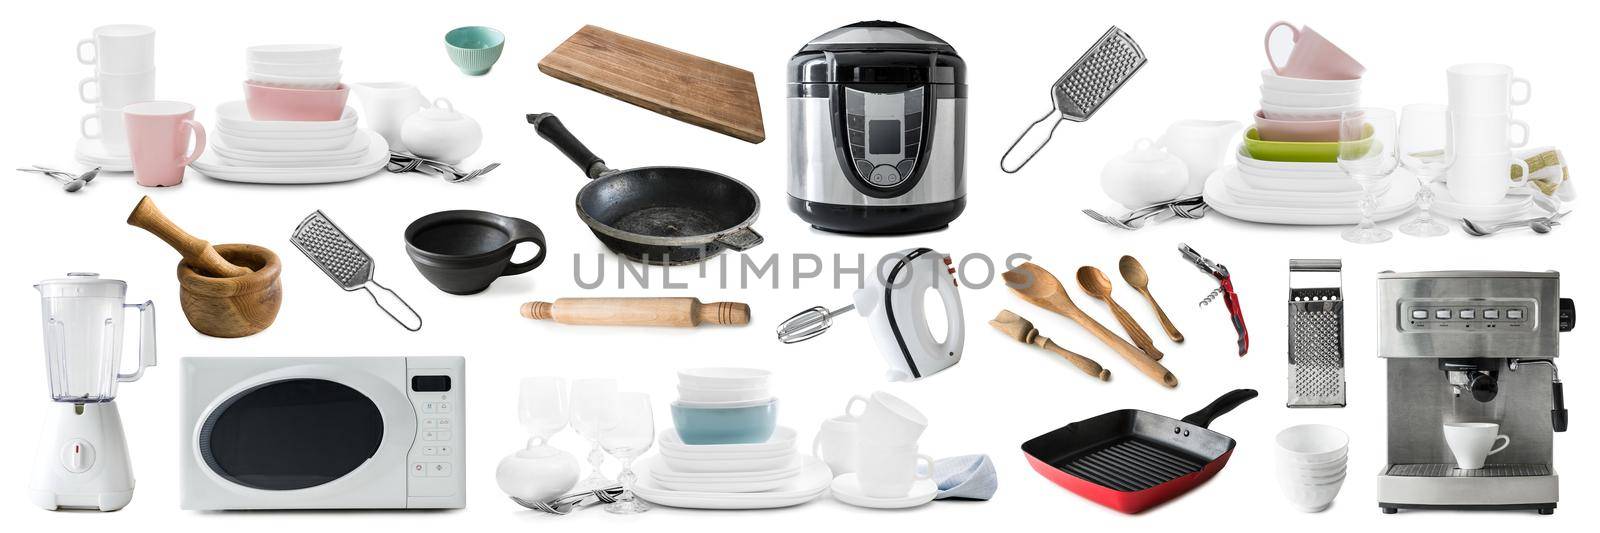 Kitchen electronics and household utensils set collage isolated on white background. Different devices and dishes for cookery collection for home